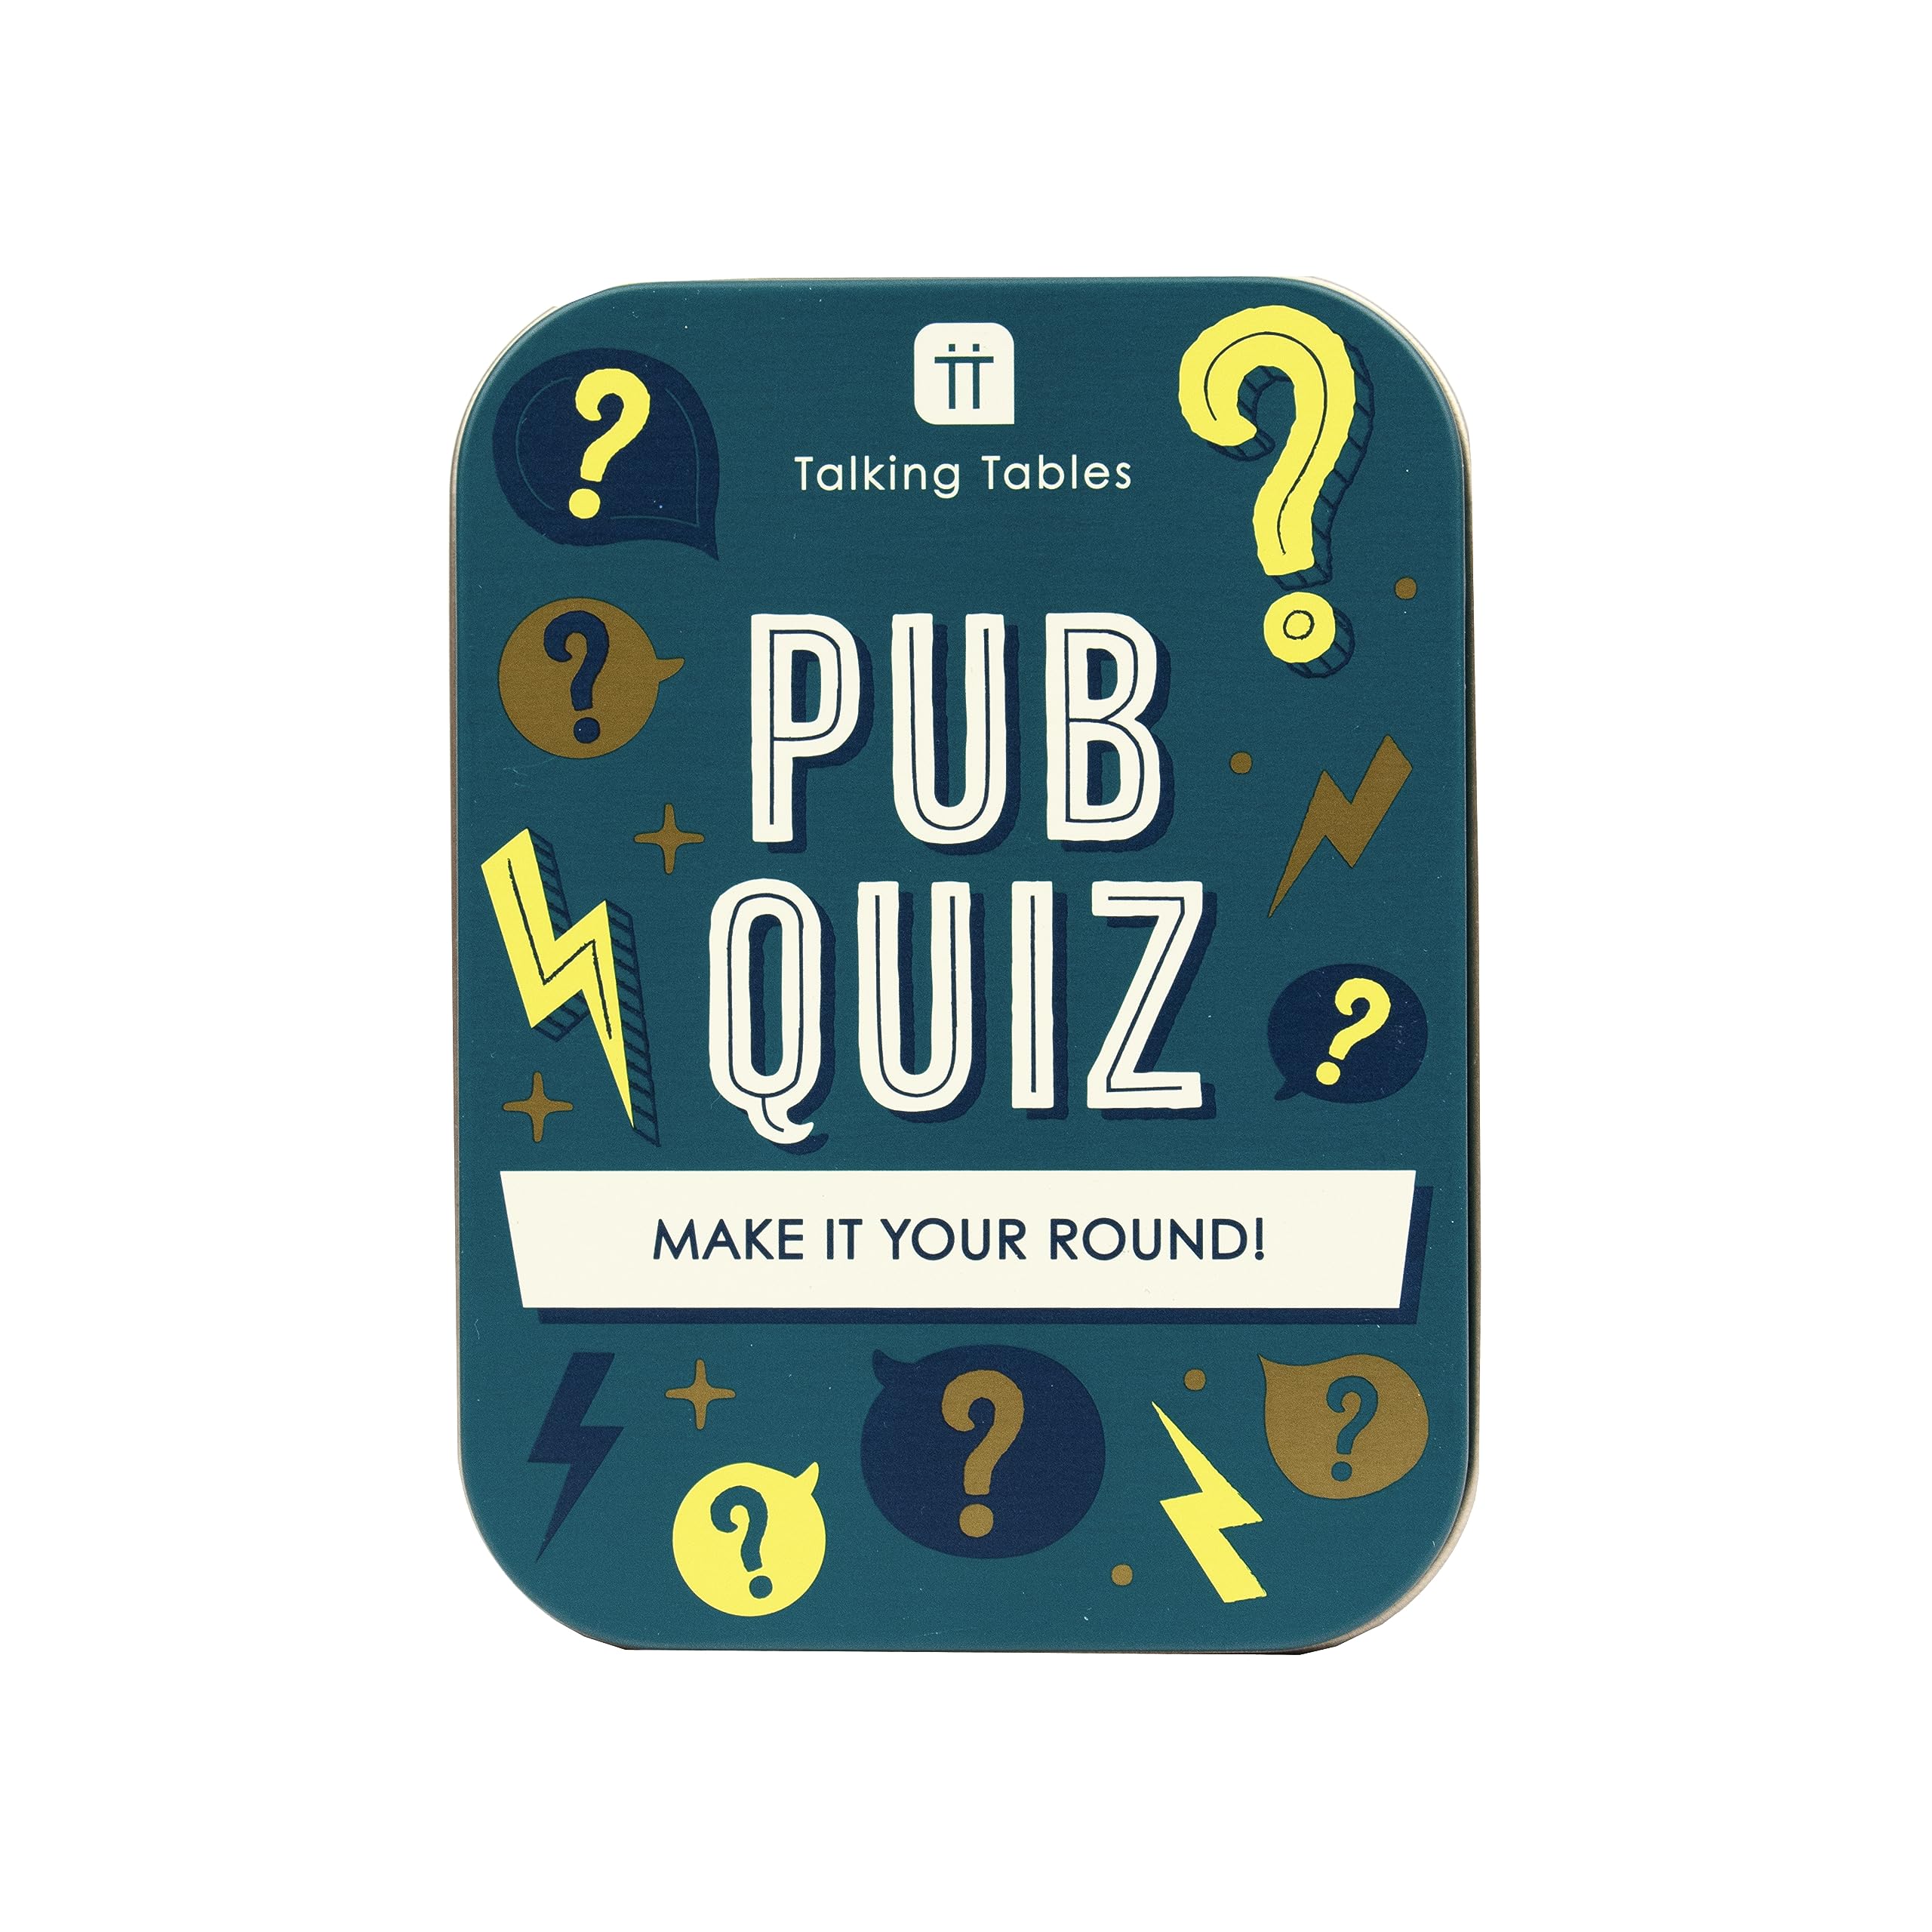 Talking Tables Pub Quiz Travel Game, Pocket Size General Knowledge Trivia for The Family to Play on a Journey or at Home Packed in a Giftable Tin Case, Secret Santa or Stocking Filler